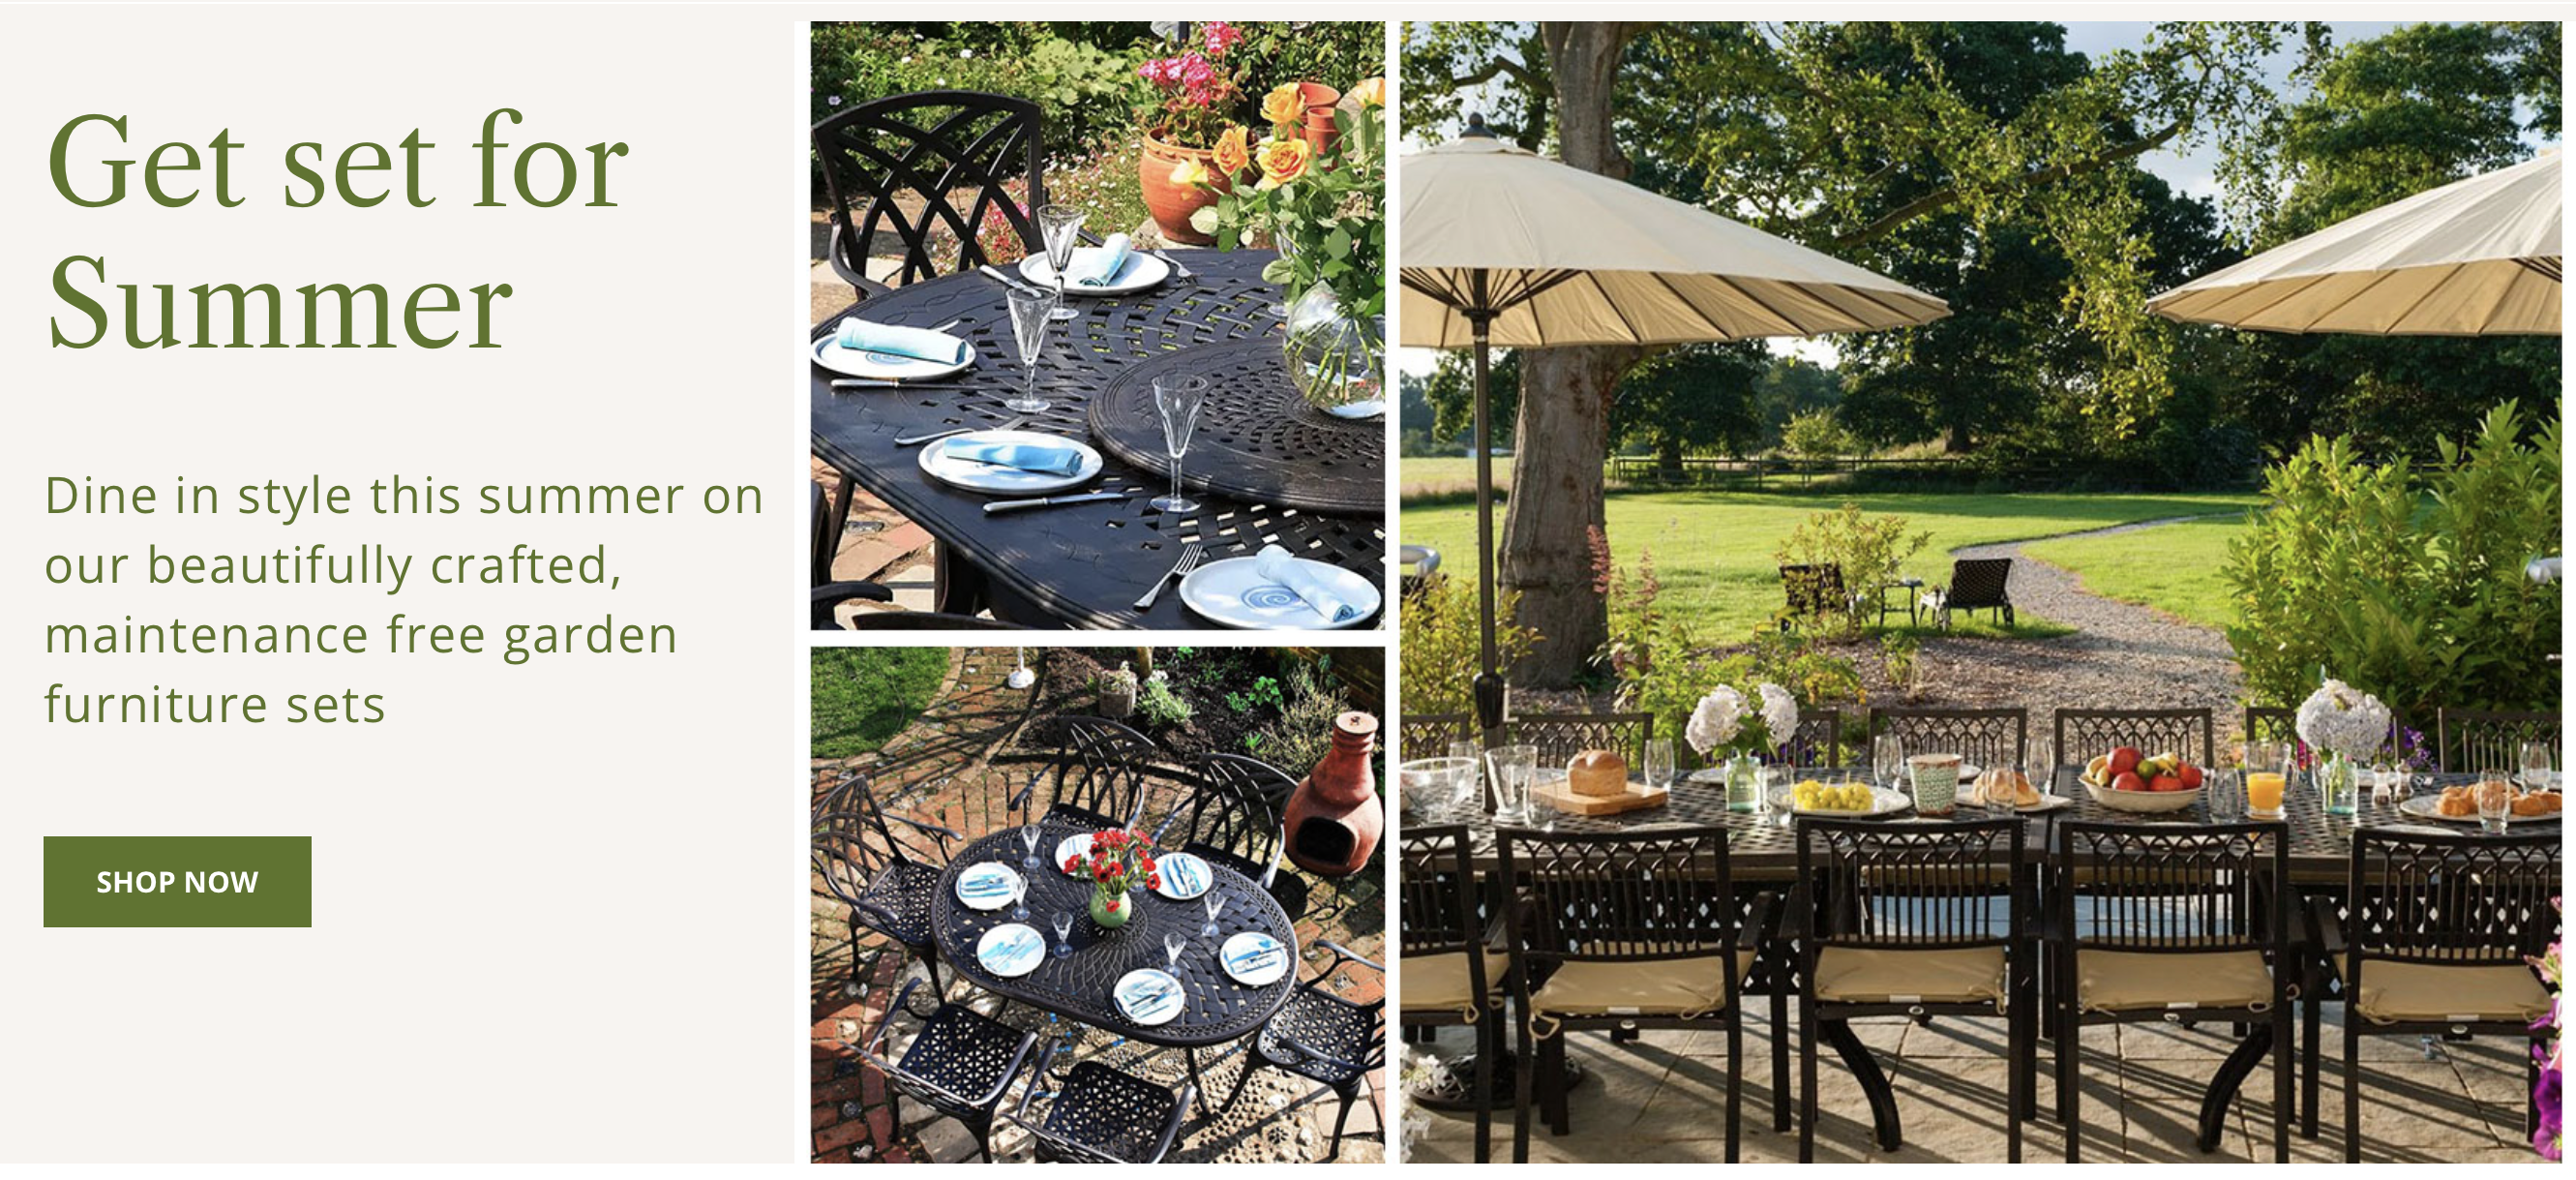 Are you looking for new Metal Garden Furniture?